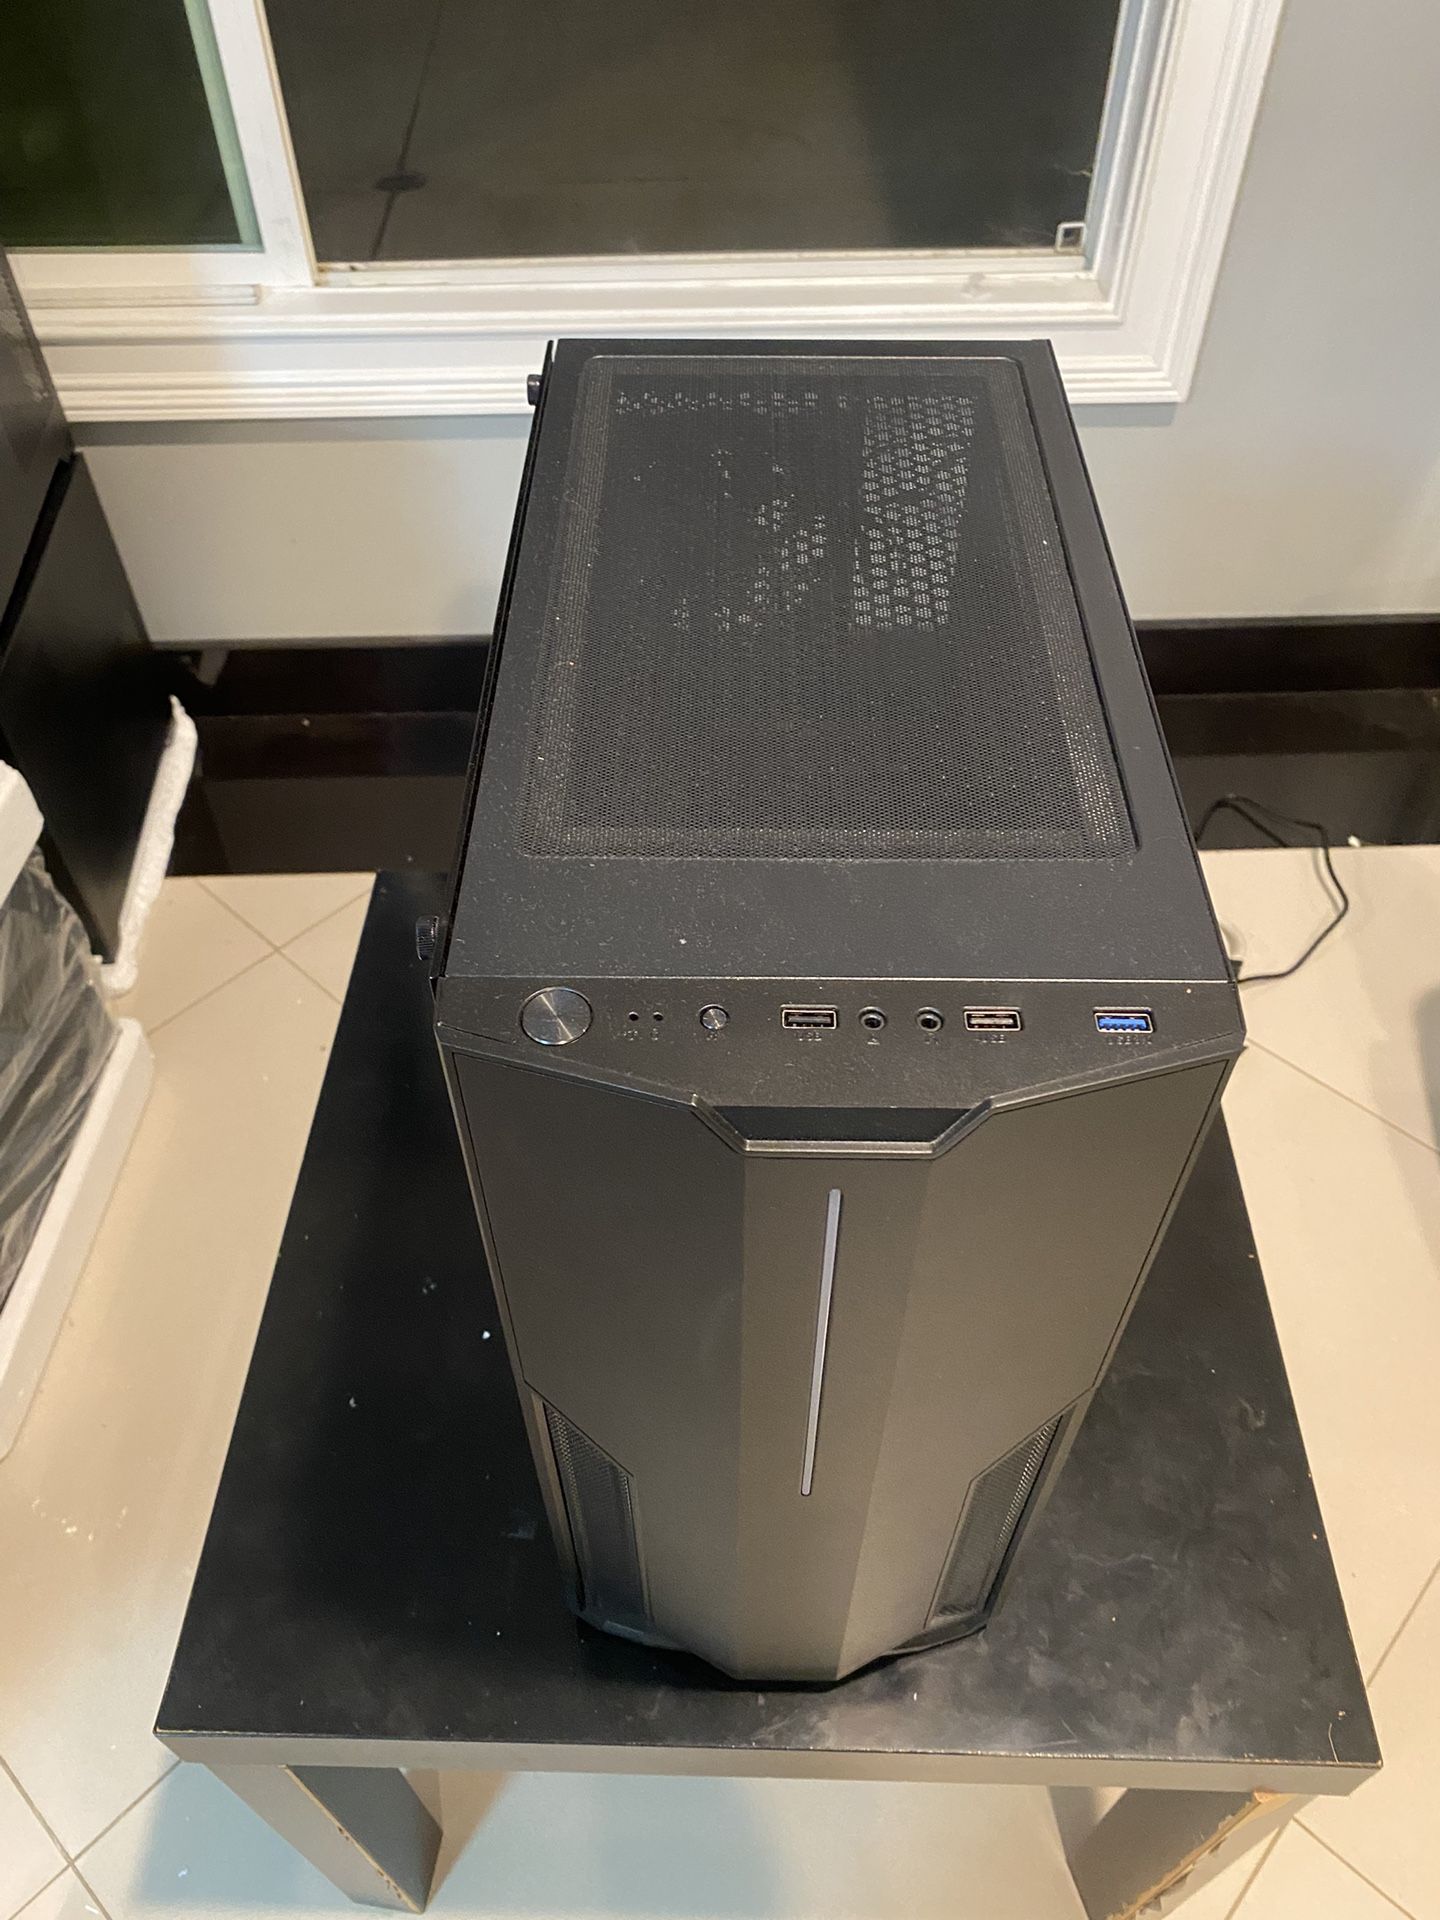 NZXT tempered glass Atx mid tower gaming case